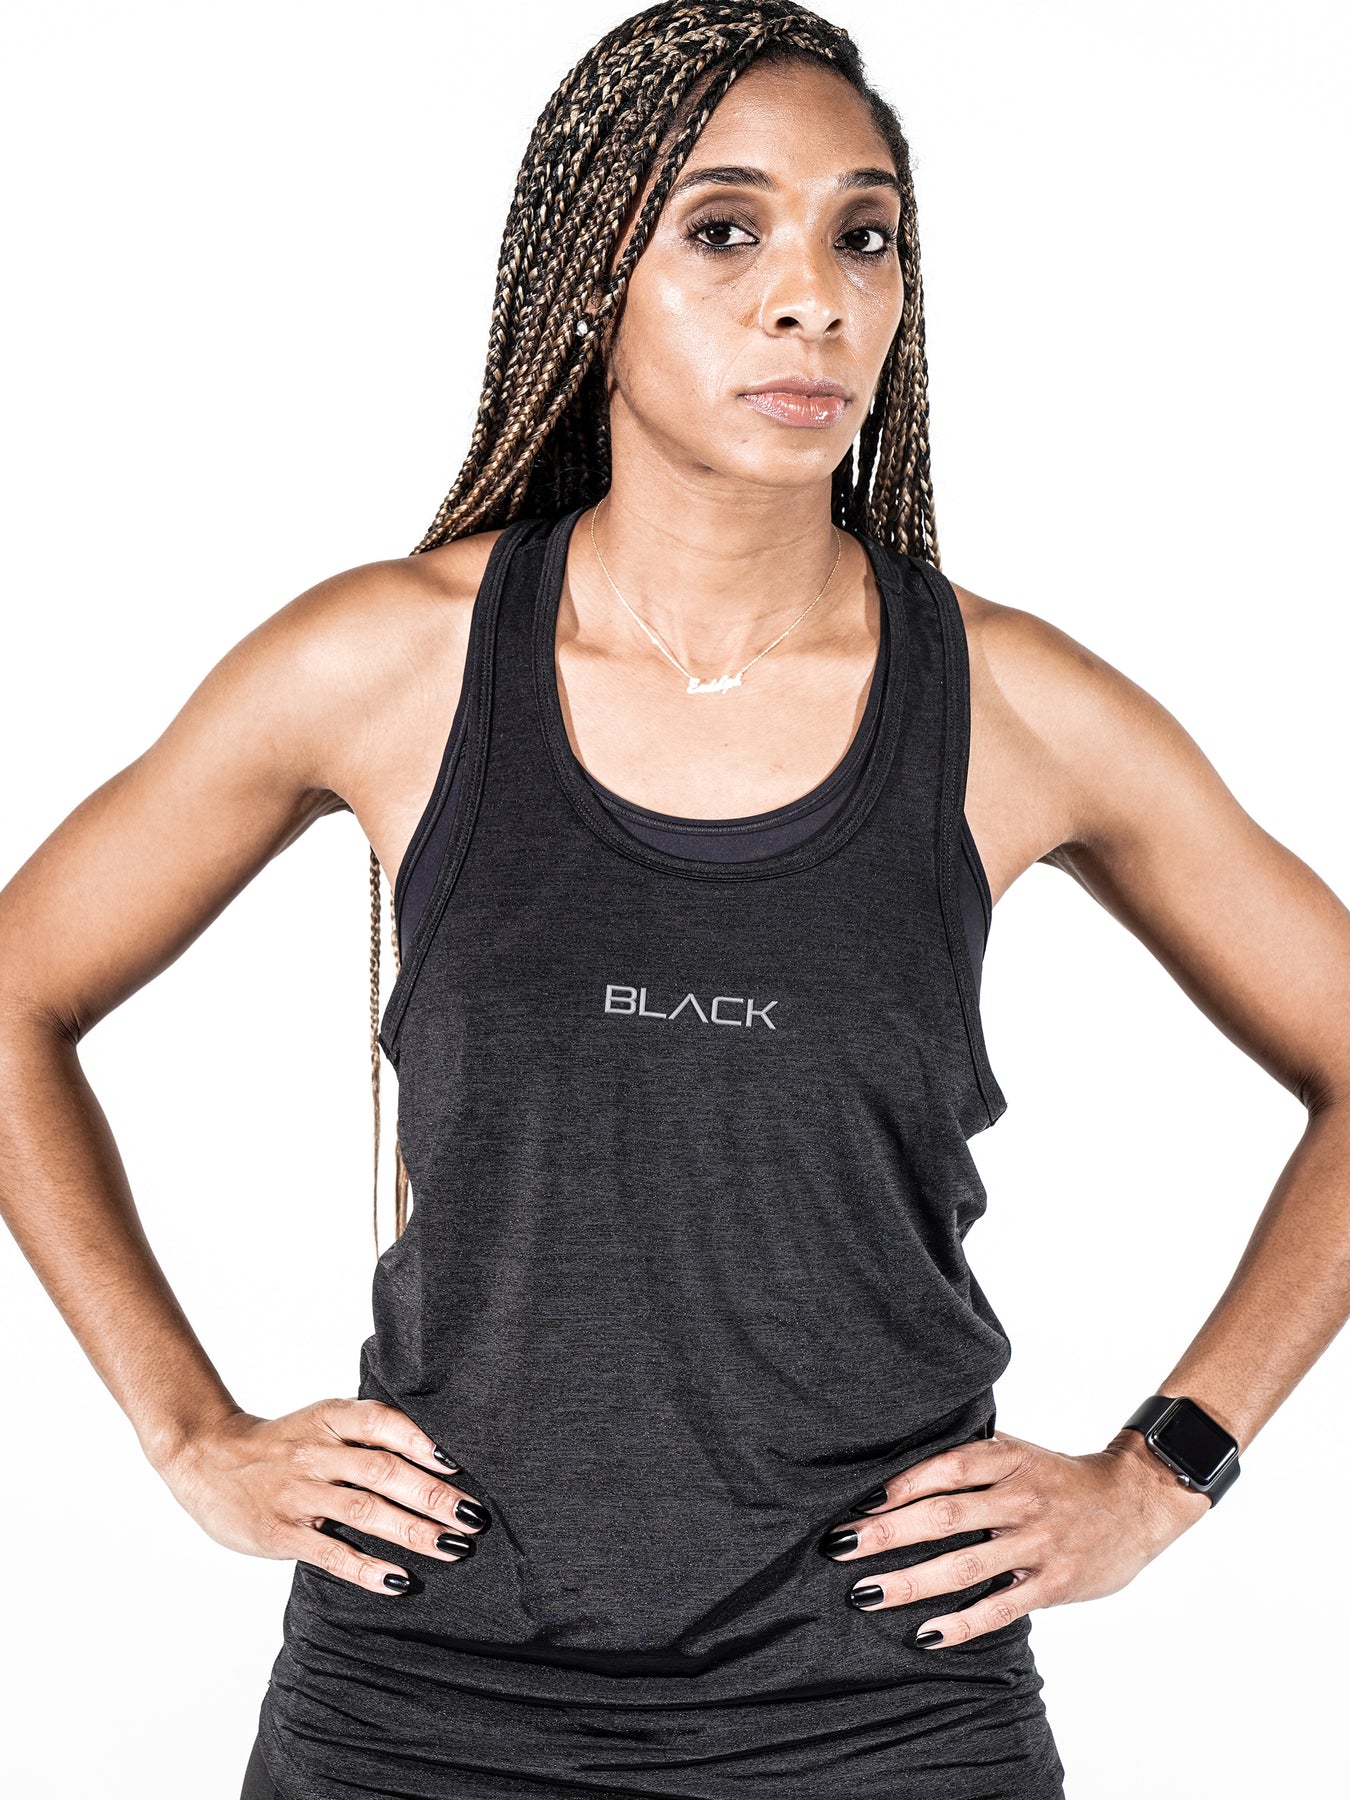 Women's Black Marble Performance Tank – Actively Black Athleisure Wear